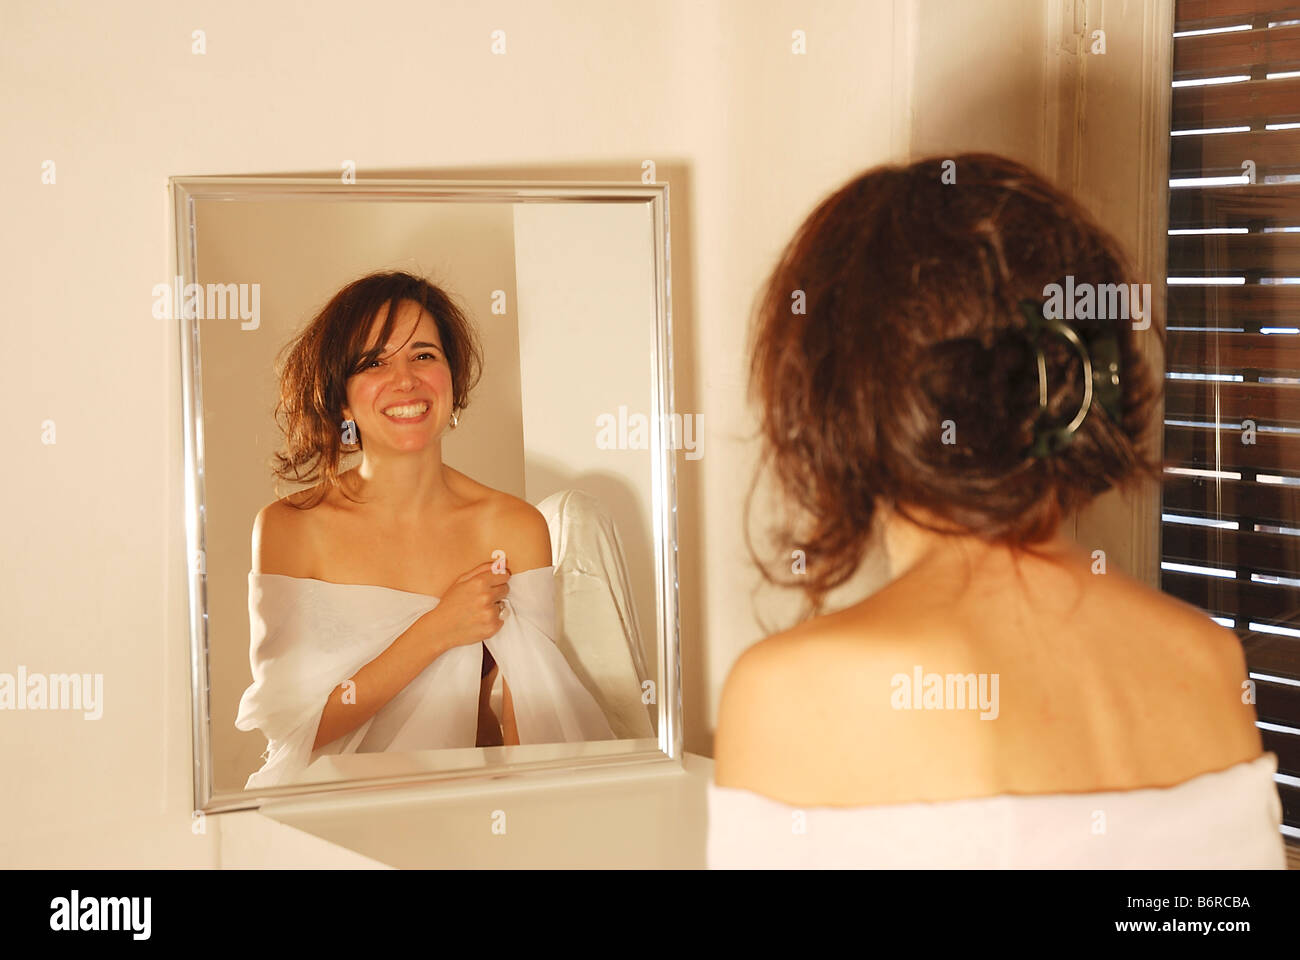 Portrait of young woman smiling reflected on mirror. Stock Photo